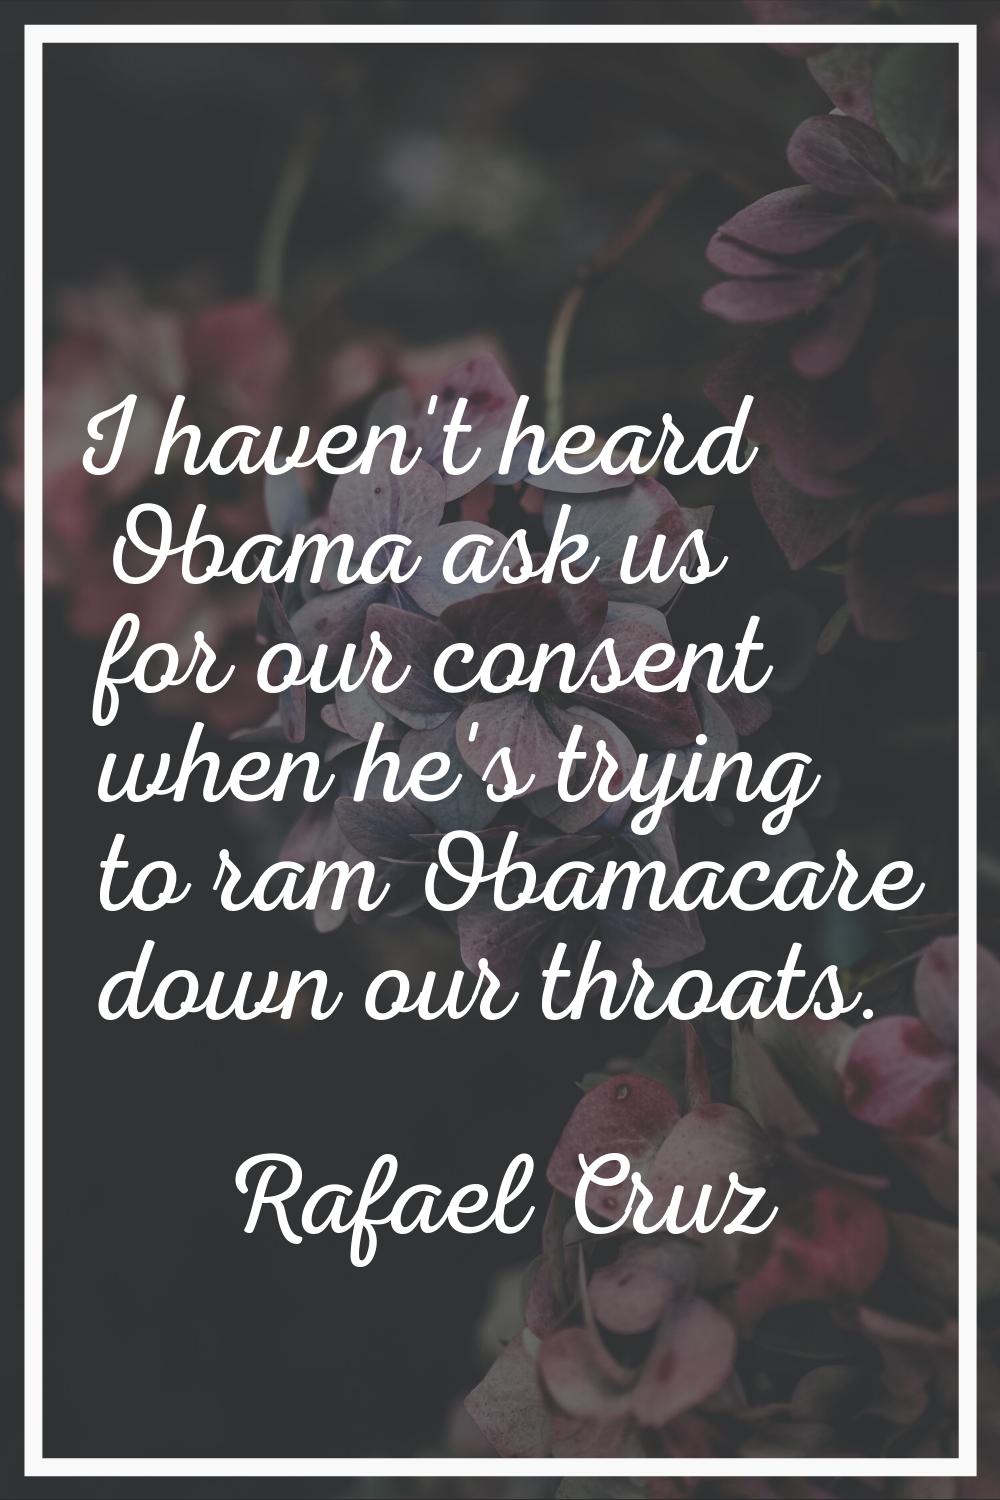 I haven't heard Obama ask us for our consent when he's trying to ram Obamacare down our throats.